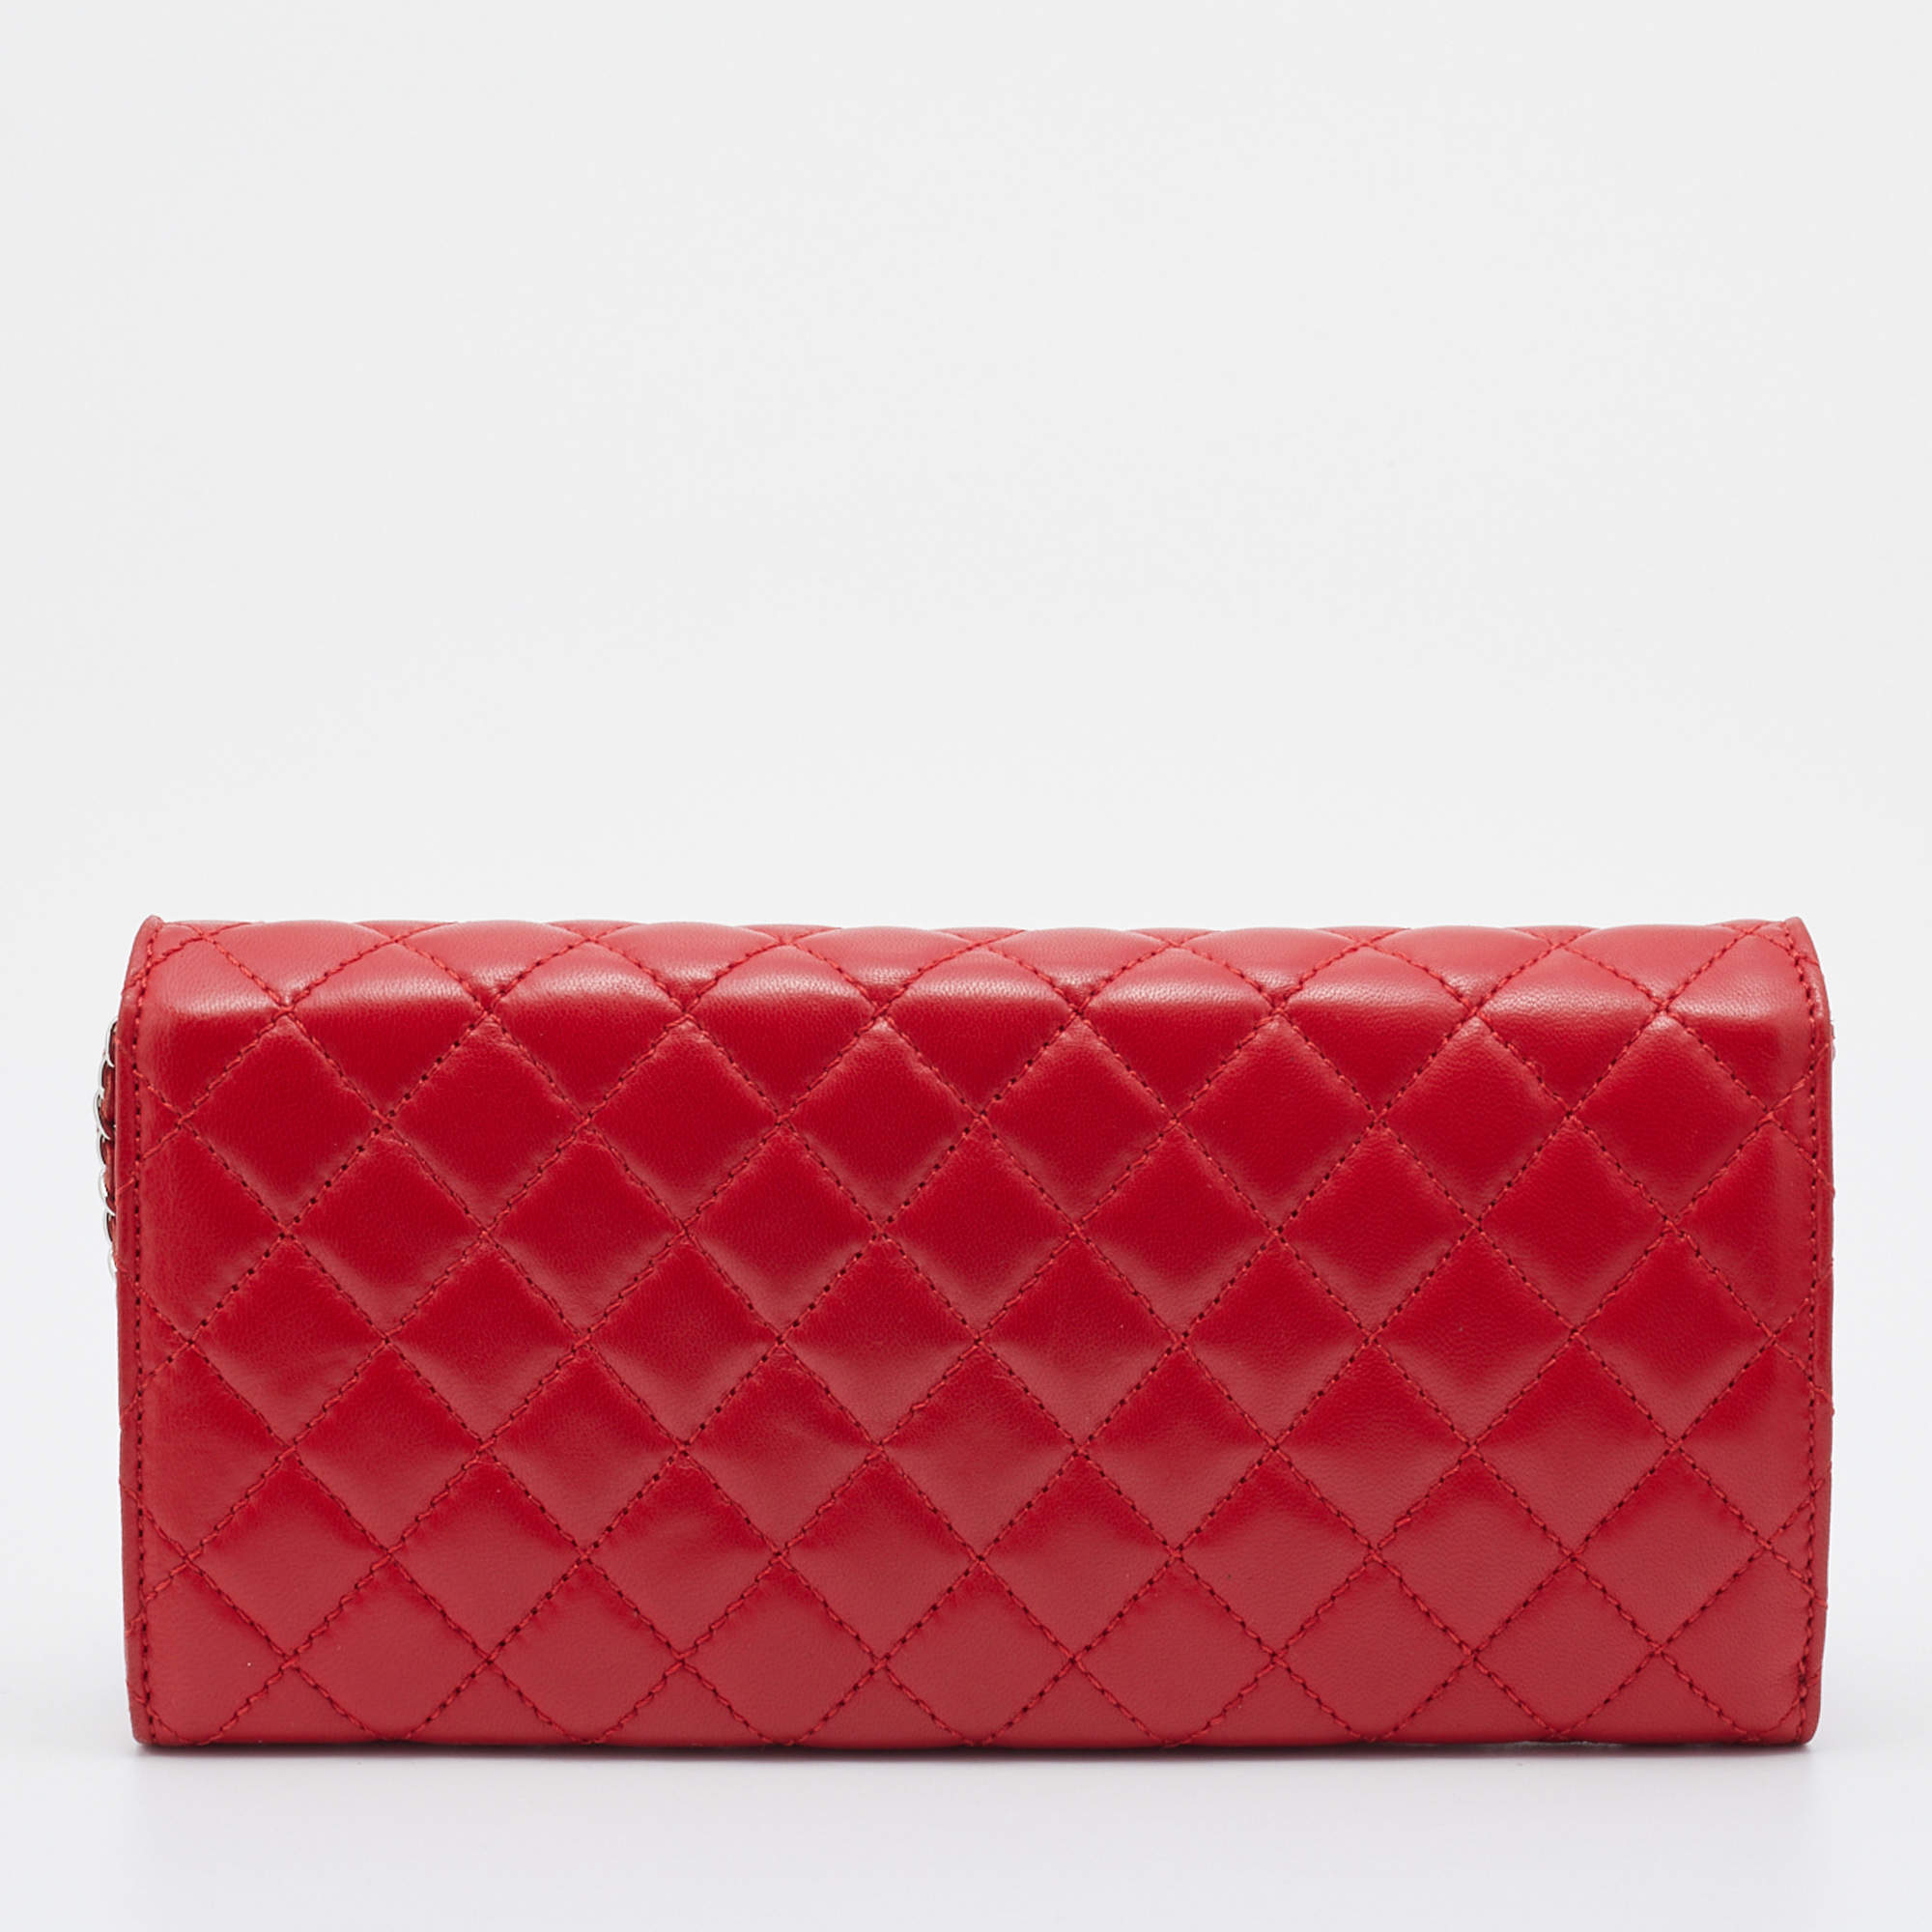 Chanel Red Quilted Leather Classic Wallet On Chain Chanel